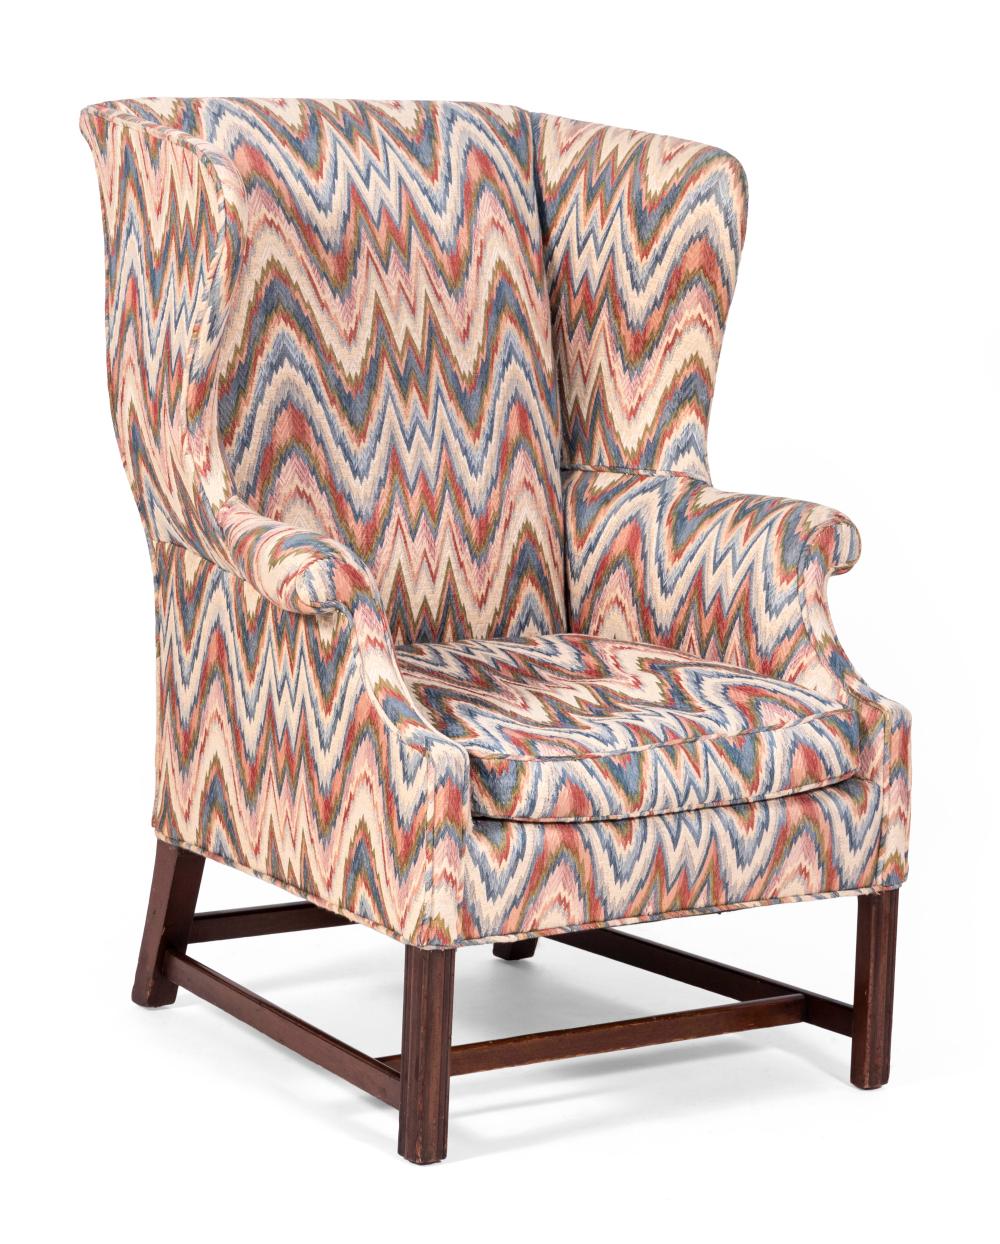 CHIPPENDALE-STYLE WING CHAIR MAHOGANY